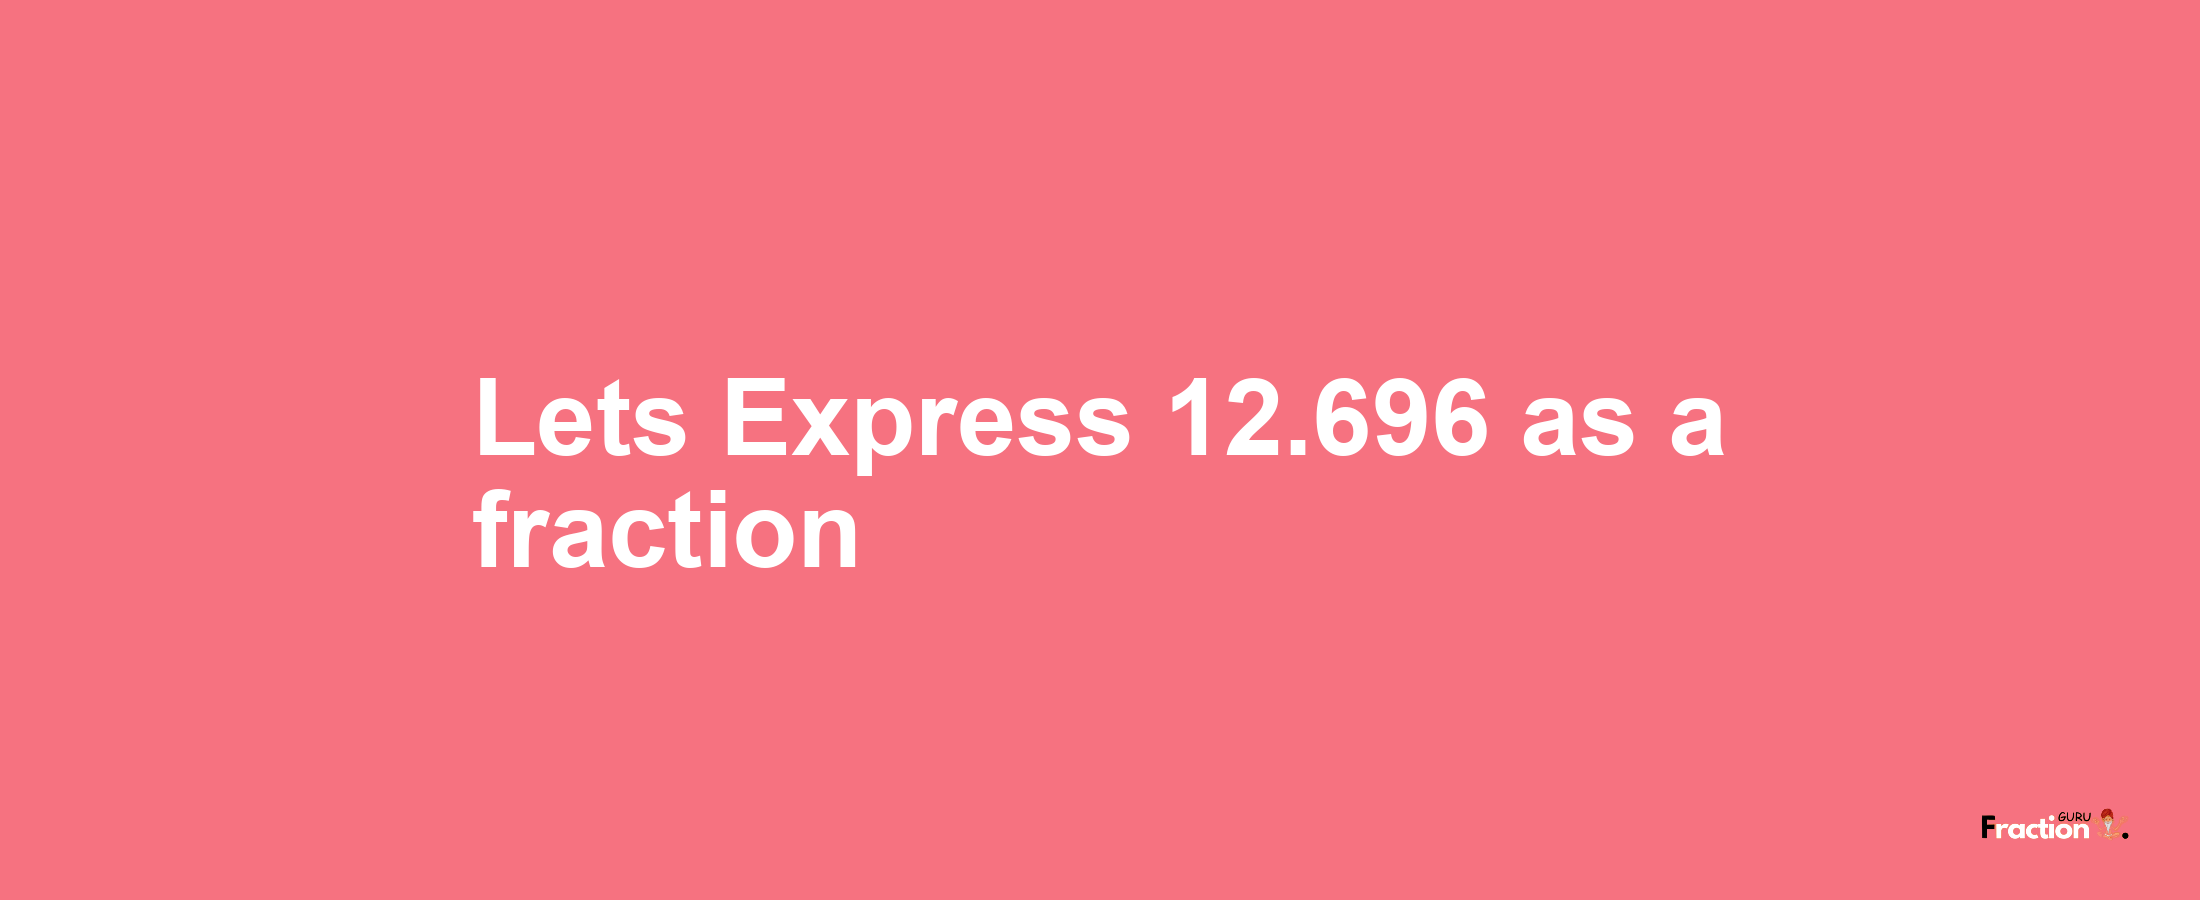 Lets Express 12.696 as afraction